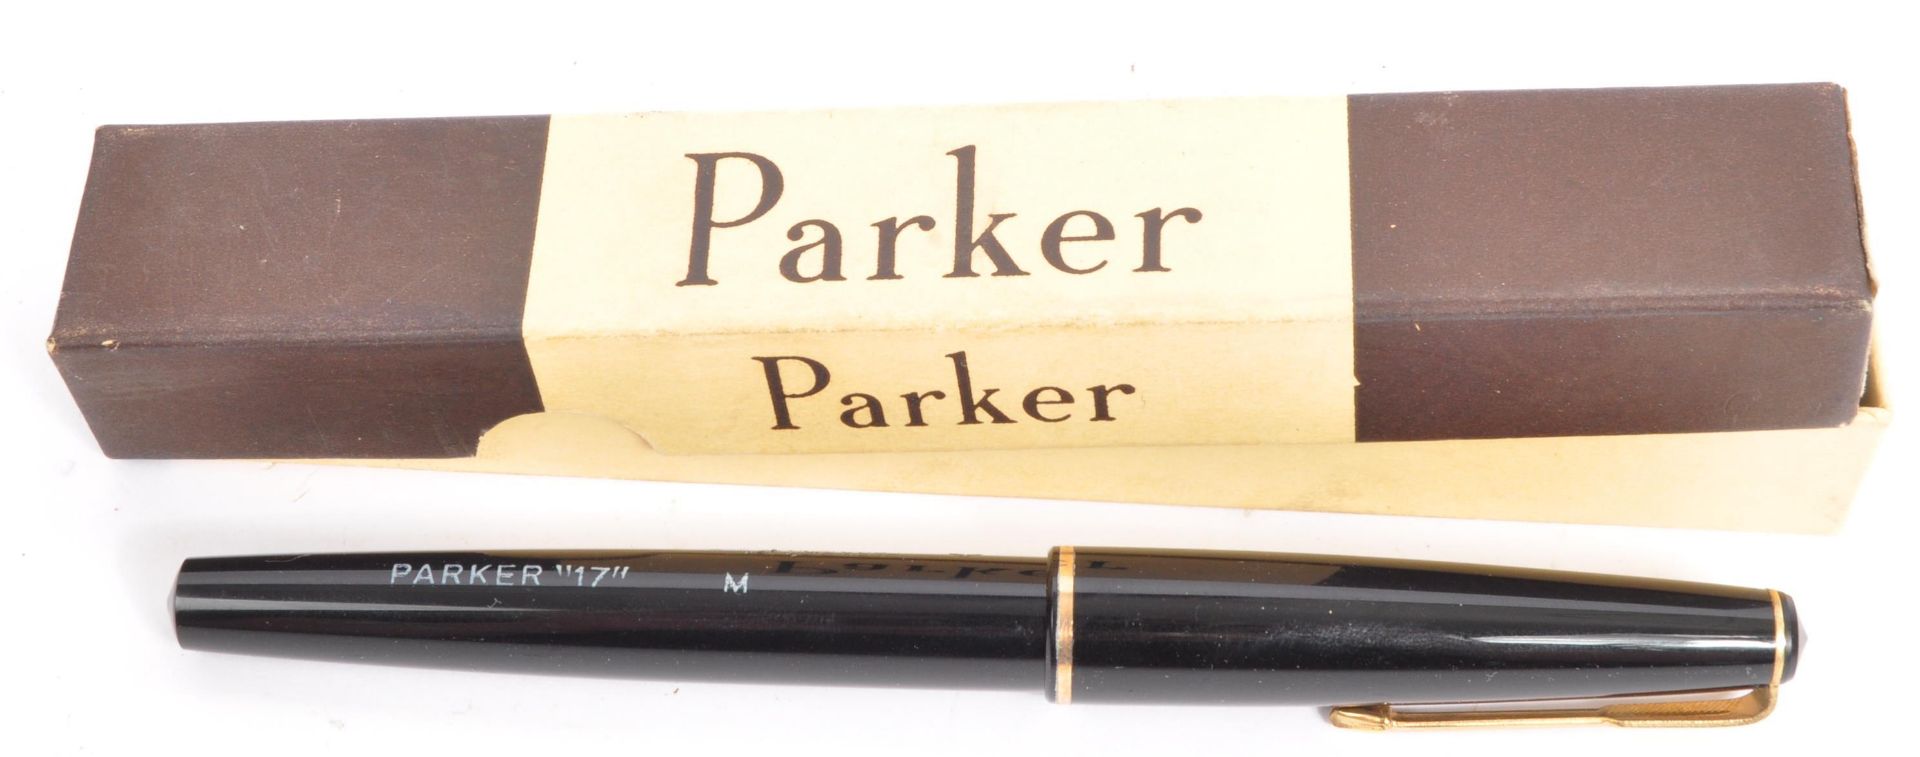 EARLY 20TH CENTURY MARQUETRY INLAID PEN BOX & PARKER PEN - Image 2 of 5